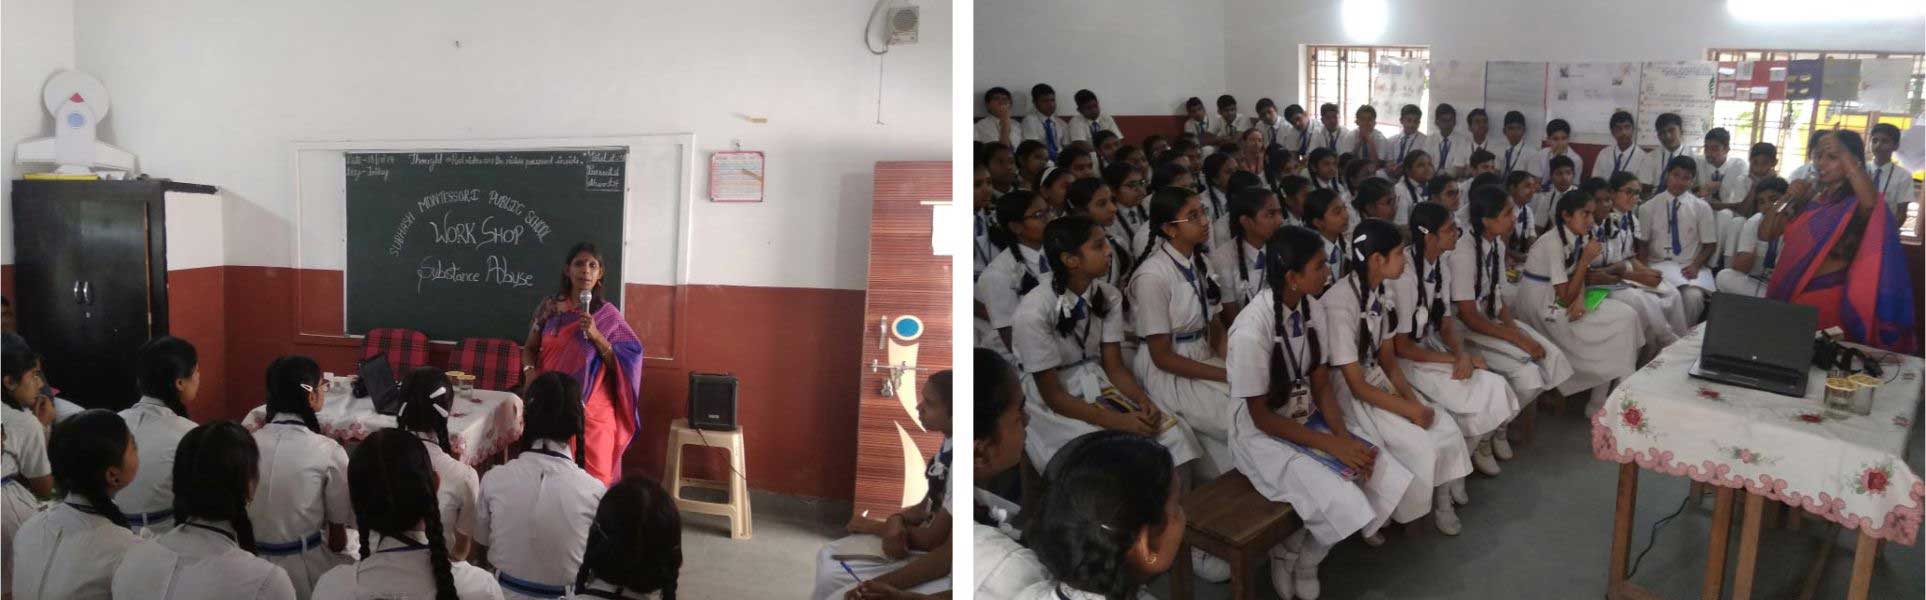 Workshop on Substance Abuse and Creating Self Esteem for children conducted